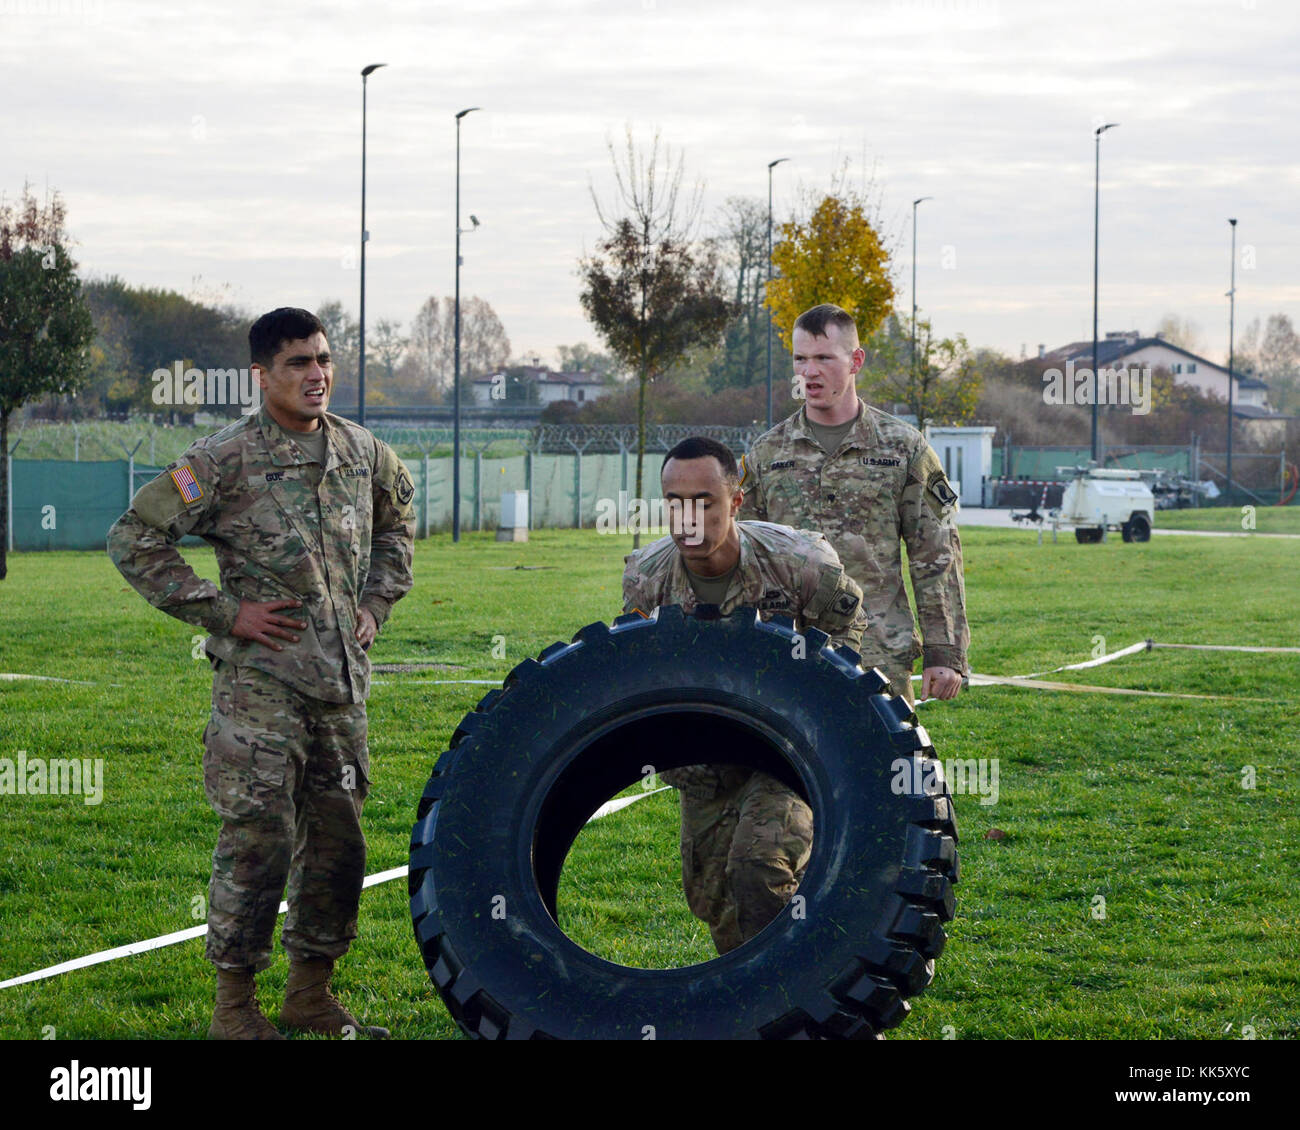 U.S. Army Paratroopers assigned to 2nd Battalion, 503rd Infantry Regiment, 173rd Airborne Brigade, compete in a timed tire-flipping event during a Rockvember Event for Brostrom Challenge, at Caserma Del Din, Vicenza, Italy, Nov. 8, 2017.   The 173rd Airborne Brigade is the U.S. Army Contingency Response Force in Europe, capable of projecting ready forces anywhere in the U.S. European, Africa or Central Commands areas of responsibility within 18 hours.   (U.S. Army photo by Massimo Bovo) Stock Photo